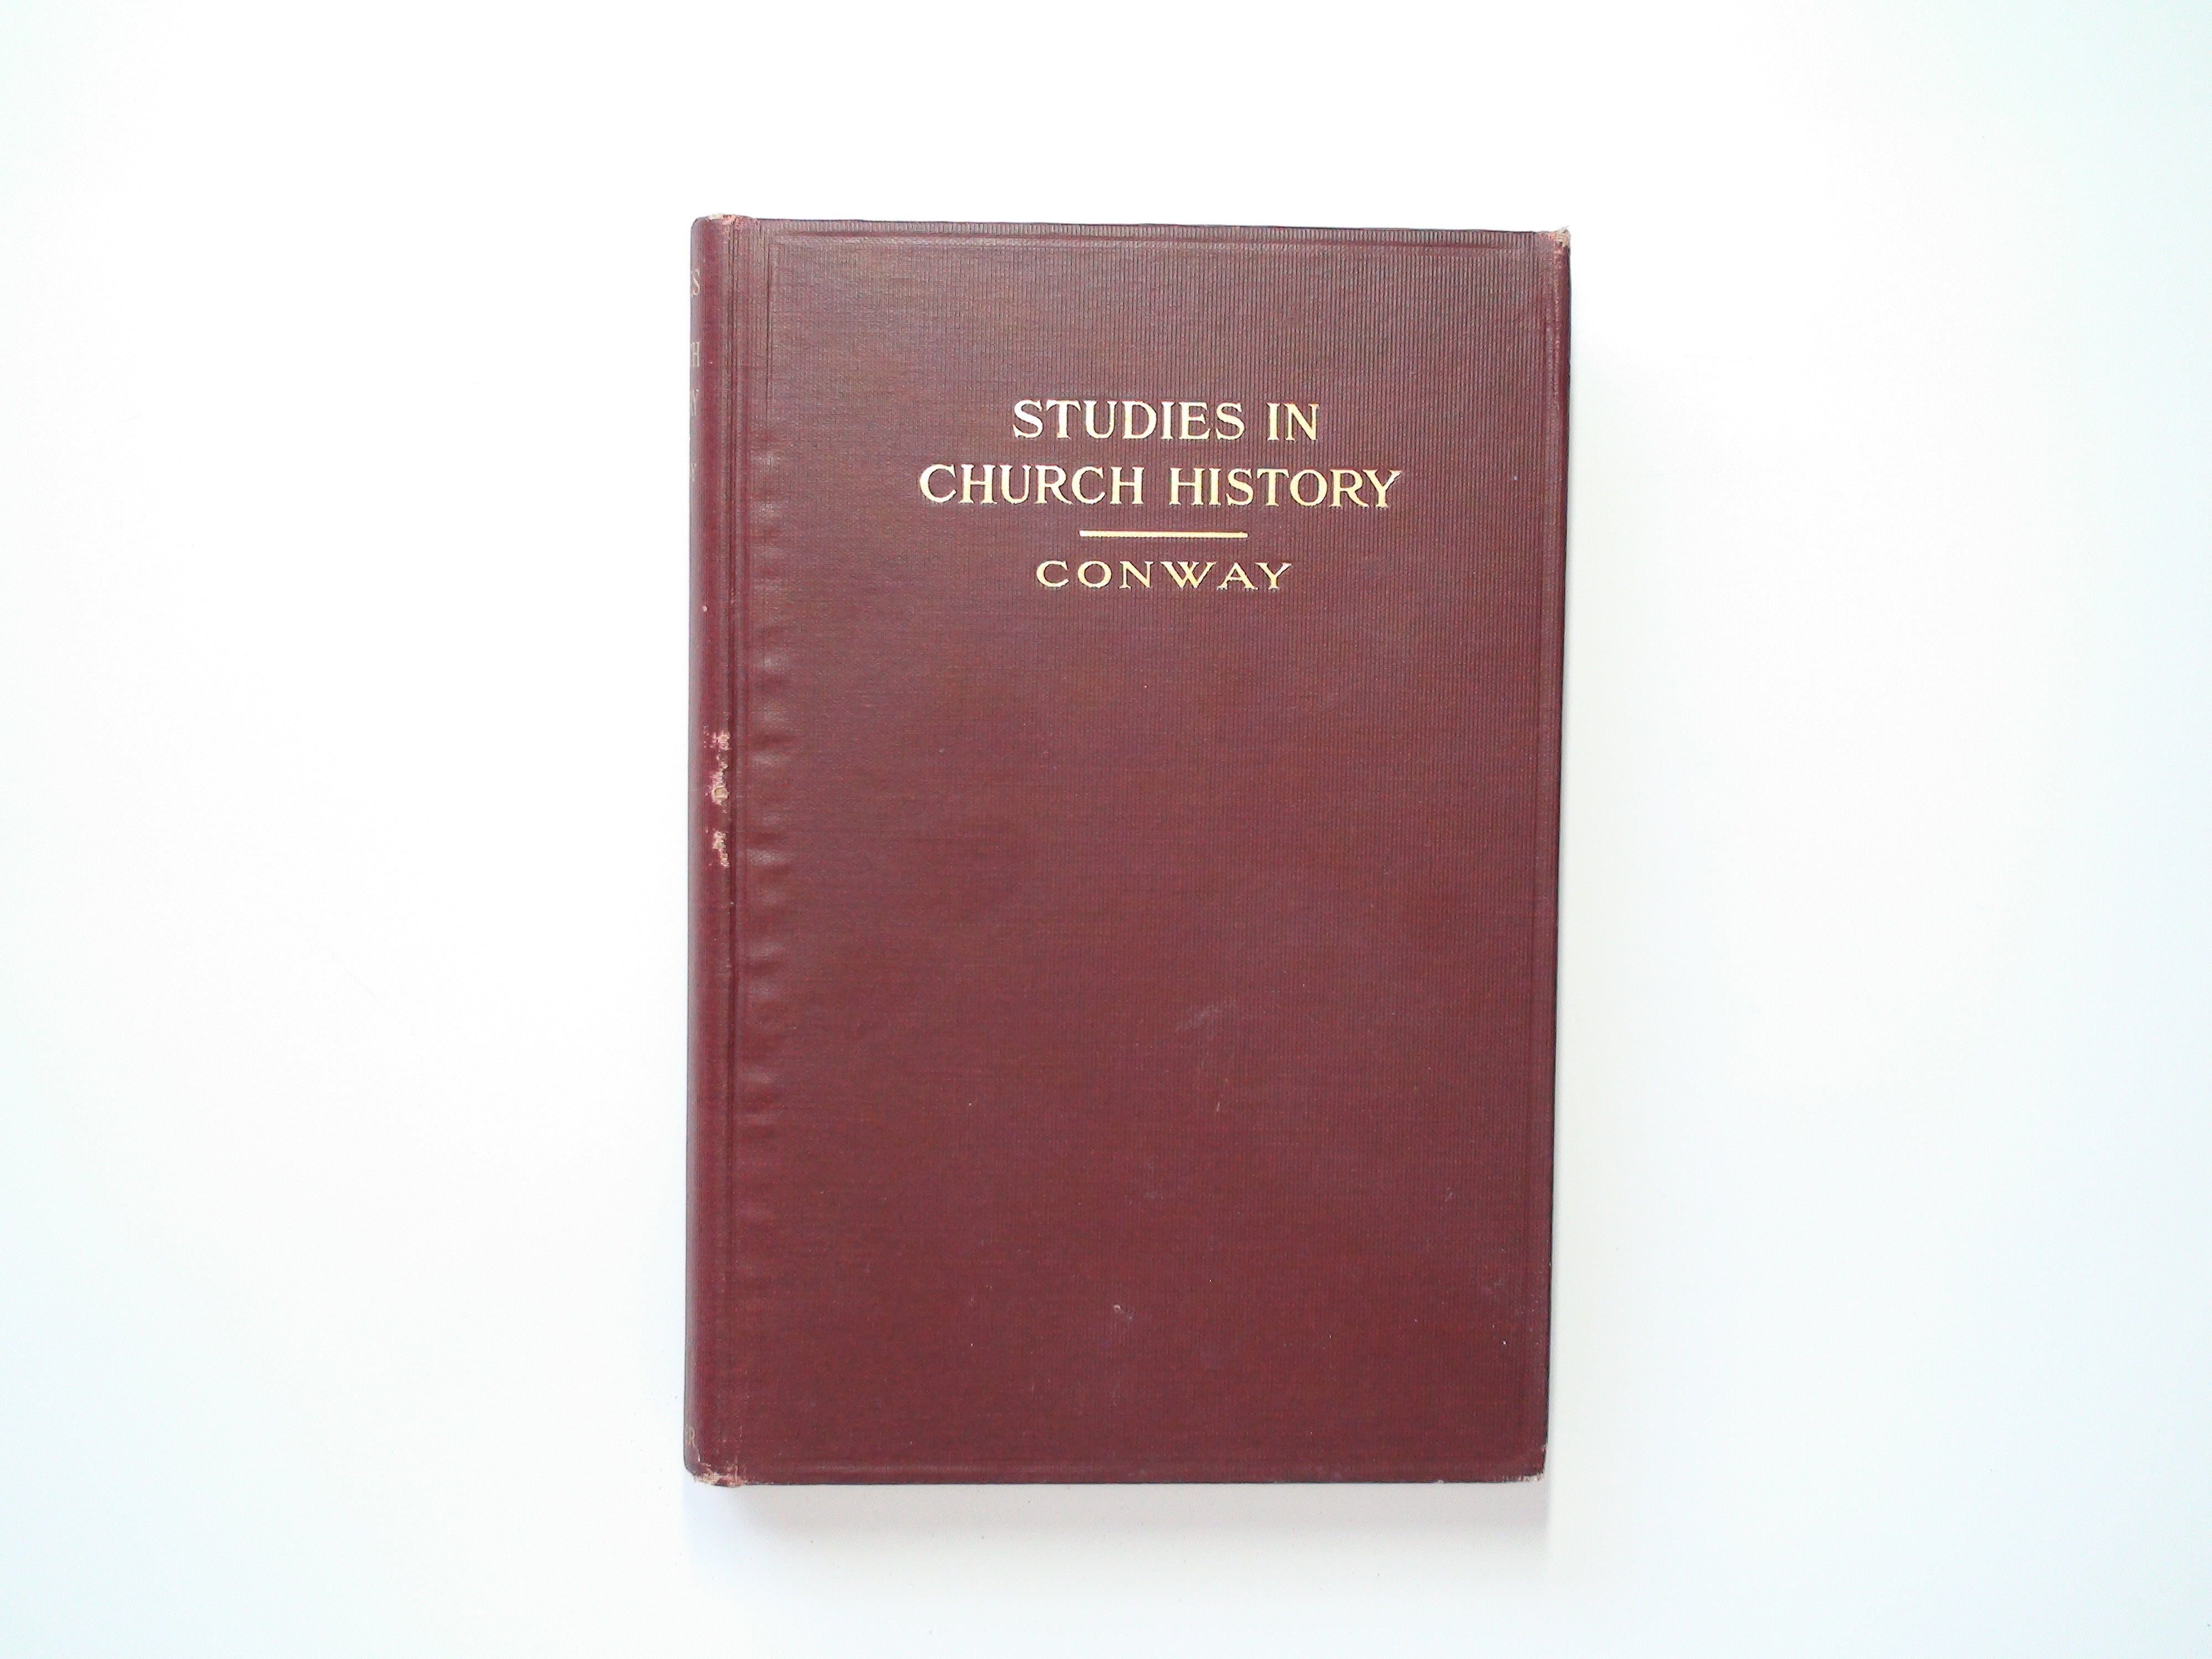 Studies in Church History, Bertrand L. Conway, Paulist Fathers, 1915